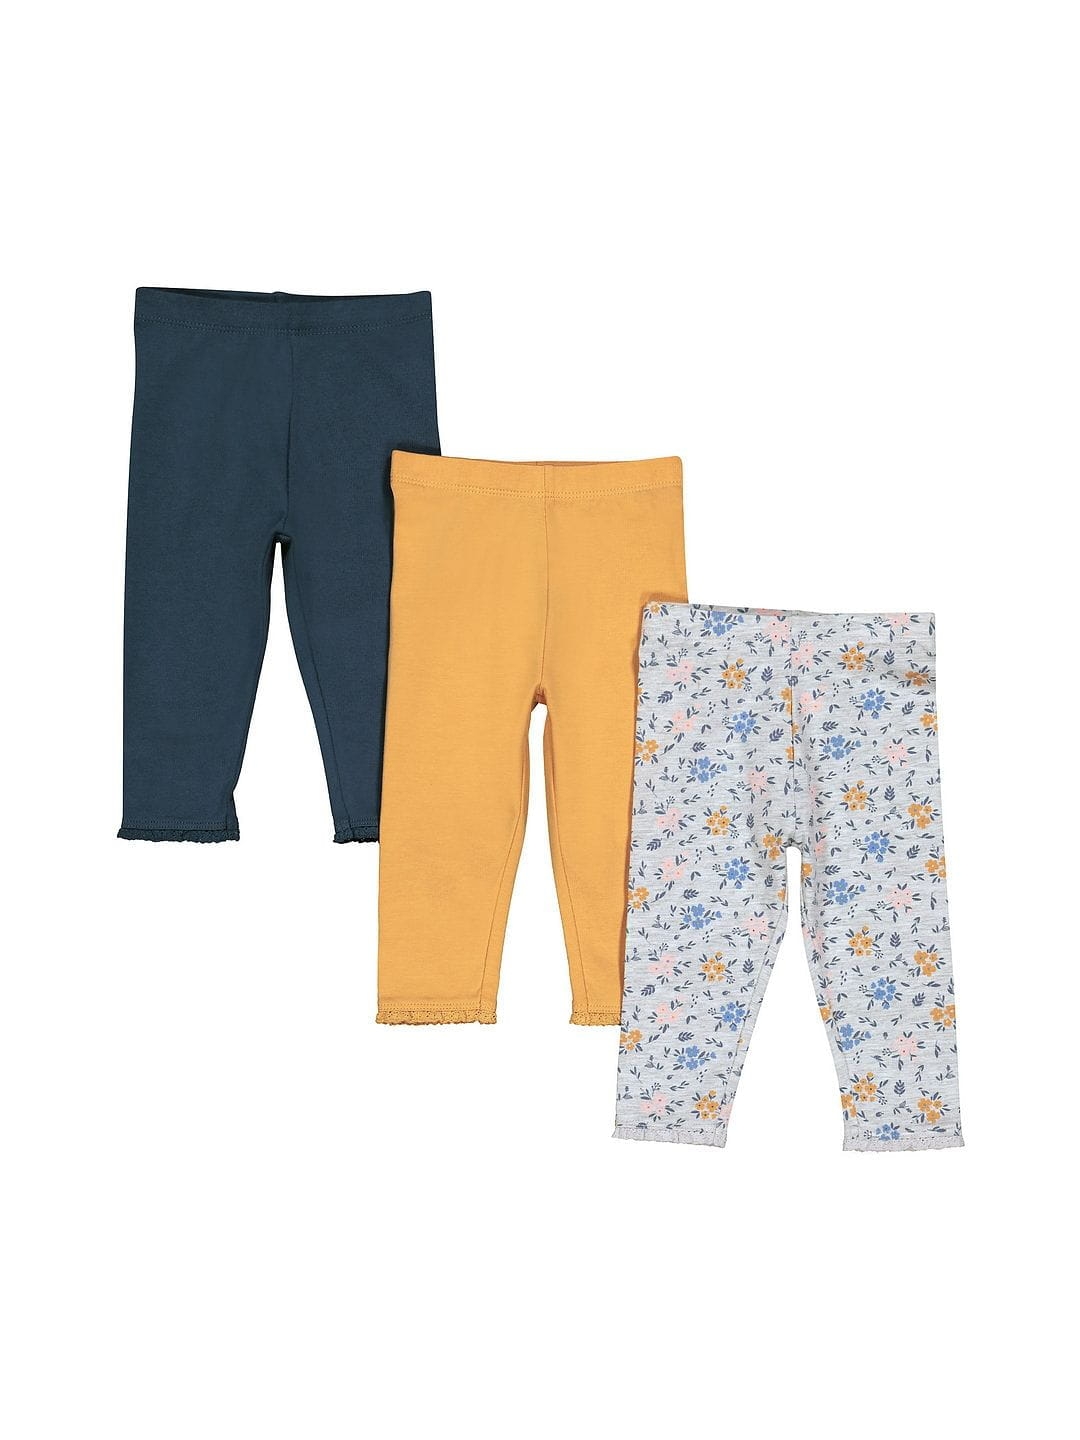 Mothercare | Navy, Mustard And Grey Floral Leggings - 3 Pack 0